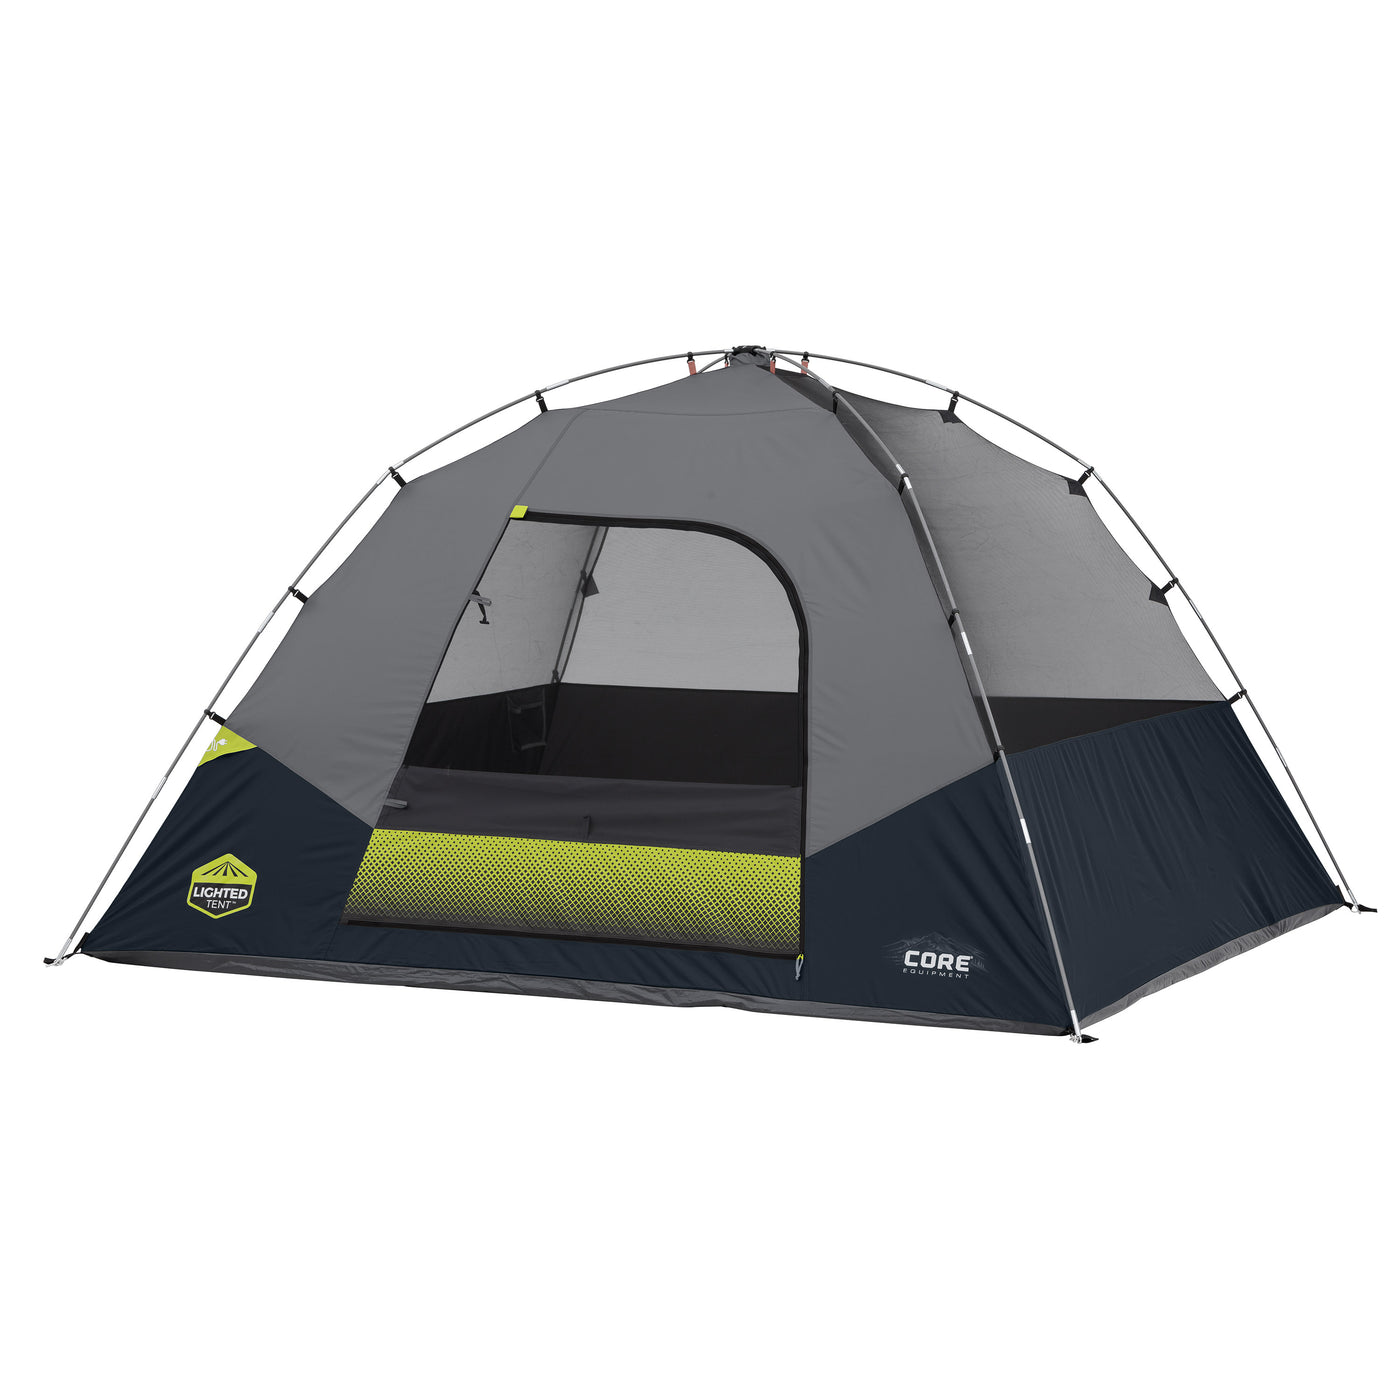 6 Person Lighted Dome Tent with Full Rainfly 10' x 9'